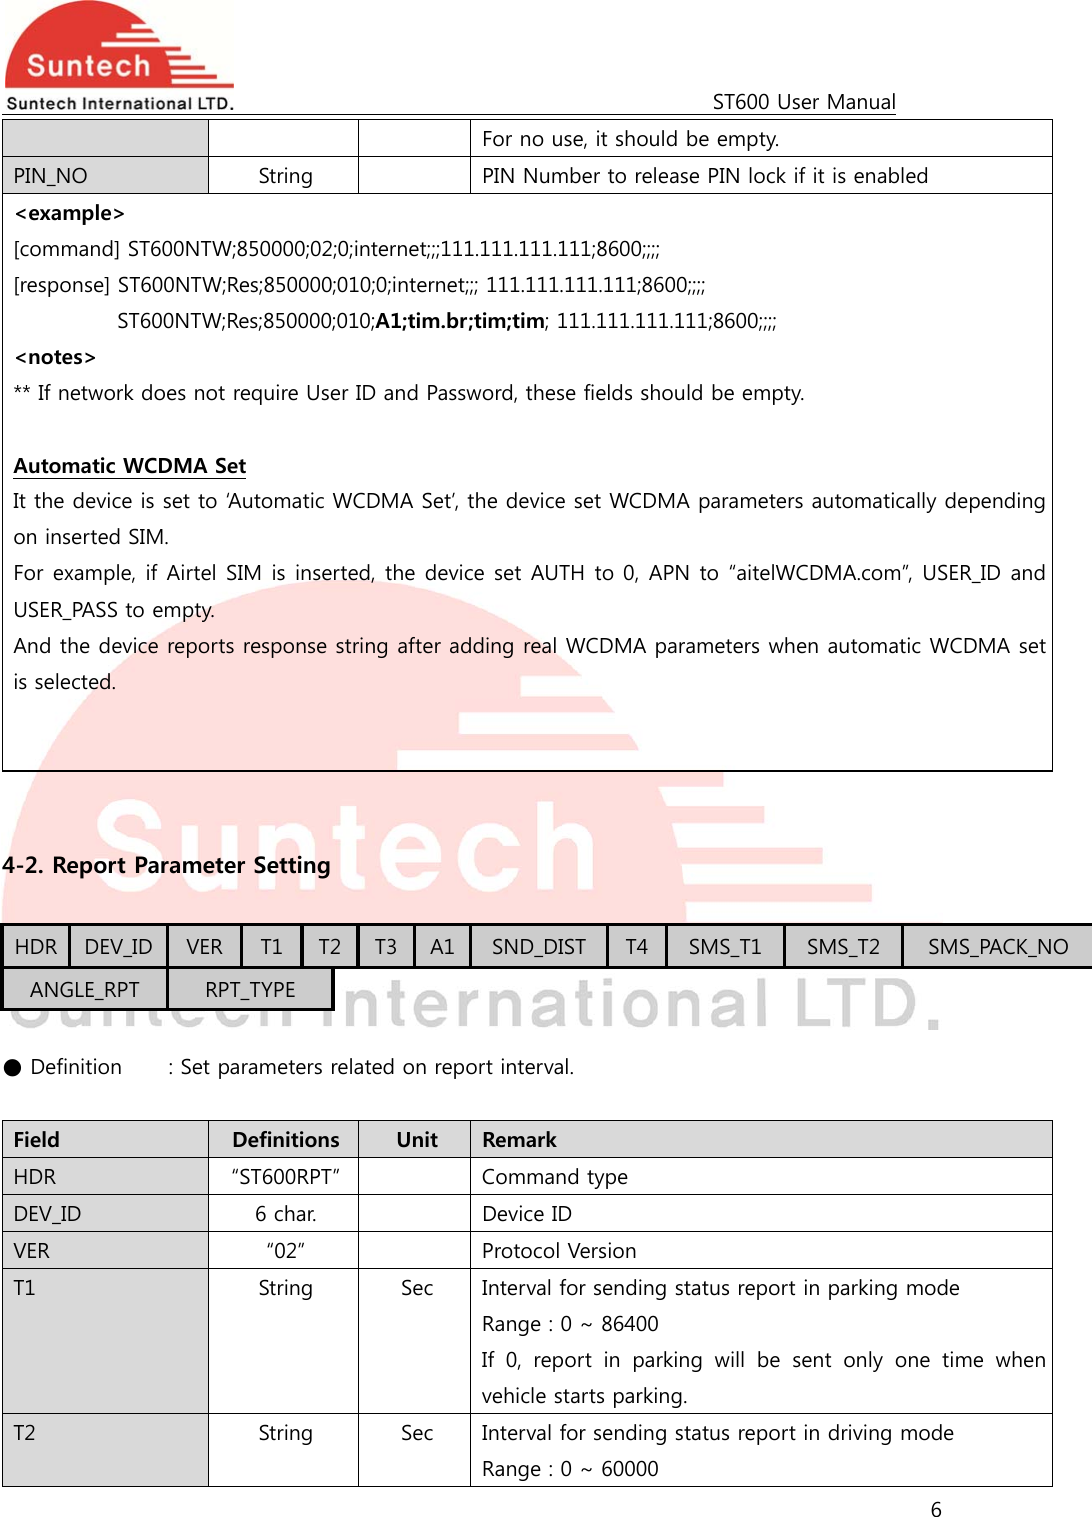                                                                                             ST600 User Manual 6  For no use, it should be empty. PIN_NO  String    PIN Number to release PIN lock if it is enabled &lt;example&gt; [command] ST600NTW;850000;02;0;internet;;;111.111.111.111;8600;;;;   [response] ST600NTW;Res;850000;010;0;internet;;; 111.111.111.111;8600;;;; ST600NTW;Res;850000;010;A1;tim.br;tim;tim; 111.111.111.111;8600;;;; &lt;notes&gt; ** If network does not require User ID and Password, these fields should be empty.  Automatic WCDMA Set It the device is set to ‘Automatic WCDMA Set’, the device set WCDMA parameters automatically depending on inserted SIM. For example, if Airtel SIM is inserted, the device set AUTH to 0, APN to “aitelWCDMA.com”, USER_ID and USER_PASS to empty. And the device reports response string after adding real WCDMA parameters when automatic WCDMA set is selected.     4-2. Report Parameter Setting  HDR  DEV_ID  VER T1  T2  T3 A1 SND_DIST  T4 SMS_T1  SMS_T2  SMS_PACK_NO ANGLE_RPT  RPT_TYPE  ● Definition   : Set parameters related on report interval.  Field  Definitions  Unit  Remark HDR  “ST600RPT”    Command type DEV_ID  6 char.    Device ID VER  “02”    Protocol Version T1  String  Sec  Interval for sending status report in parking mode Range : 0 ~ 86400 If  0,  report  in  parking  will  be  sent  only  one  time  when vehicle starts parking. T2  String  Sec  Interval for sending status report in driving mode Range : 0 ~ 60000 